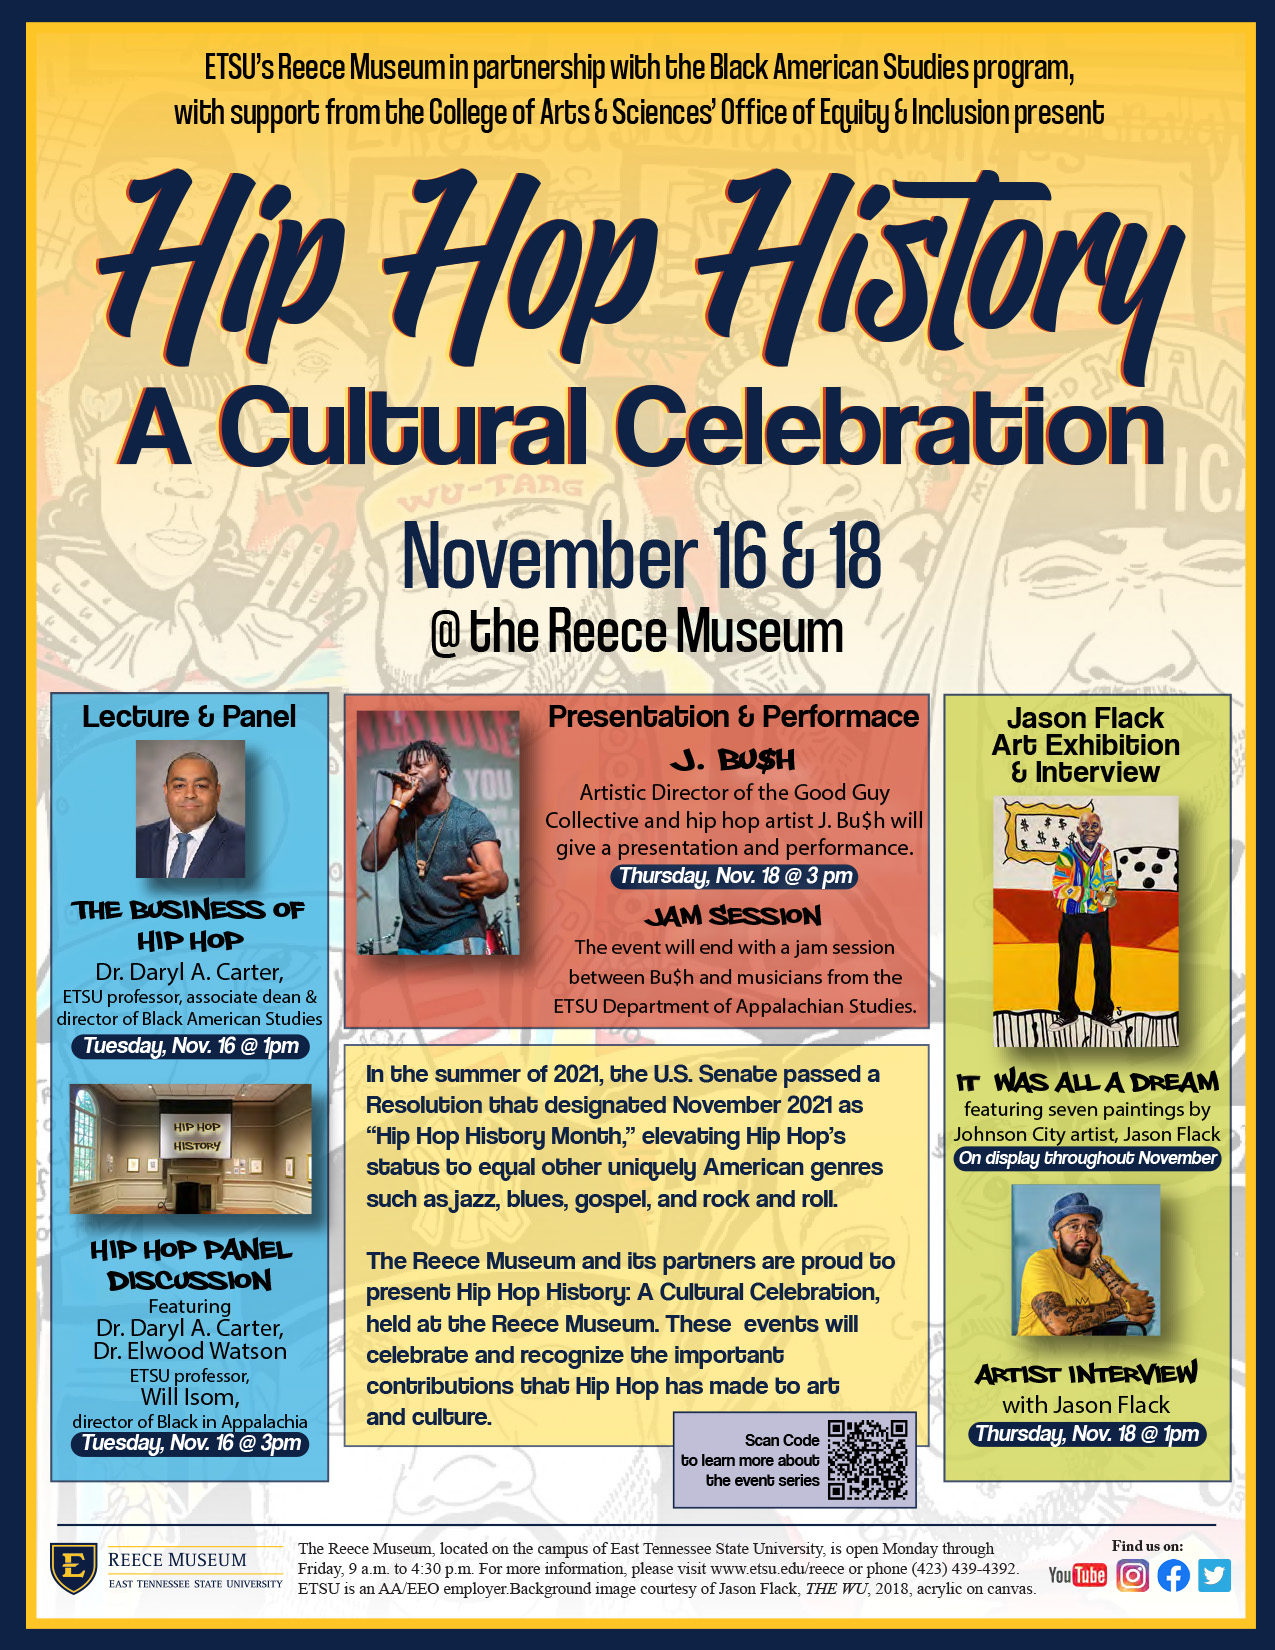 Hip-Hop History month poster with event details discussed in the commentary above